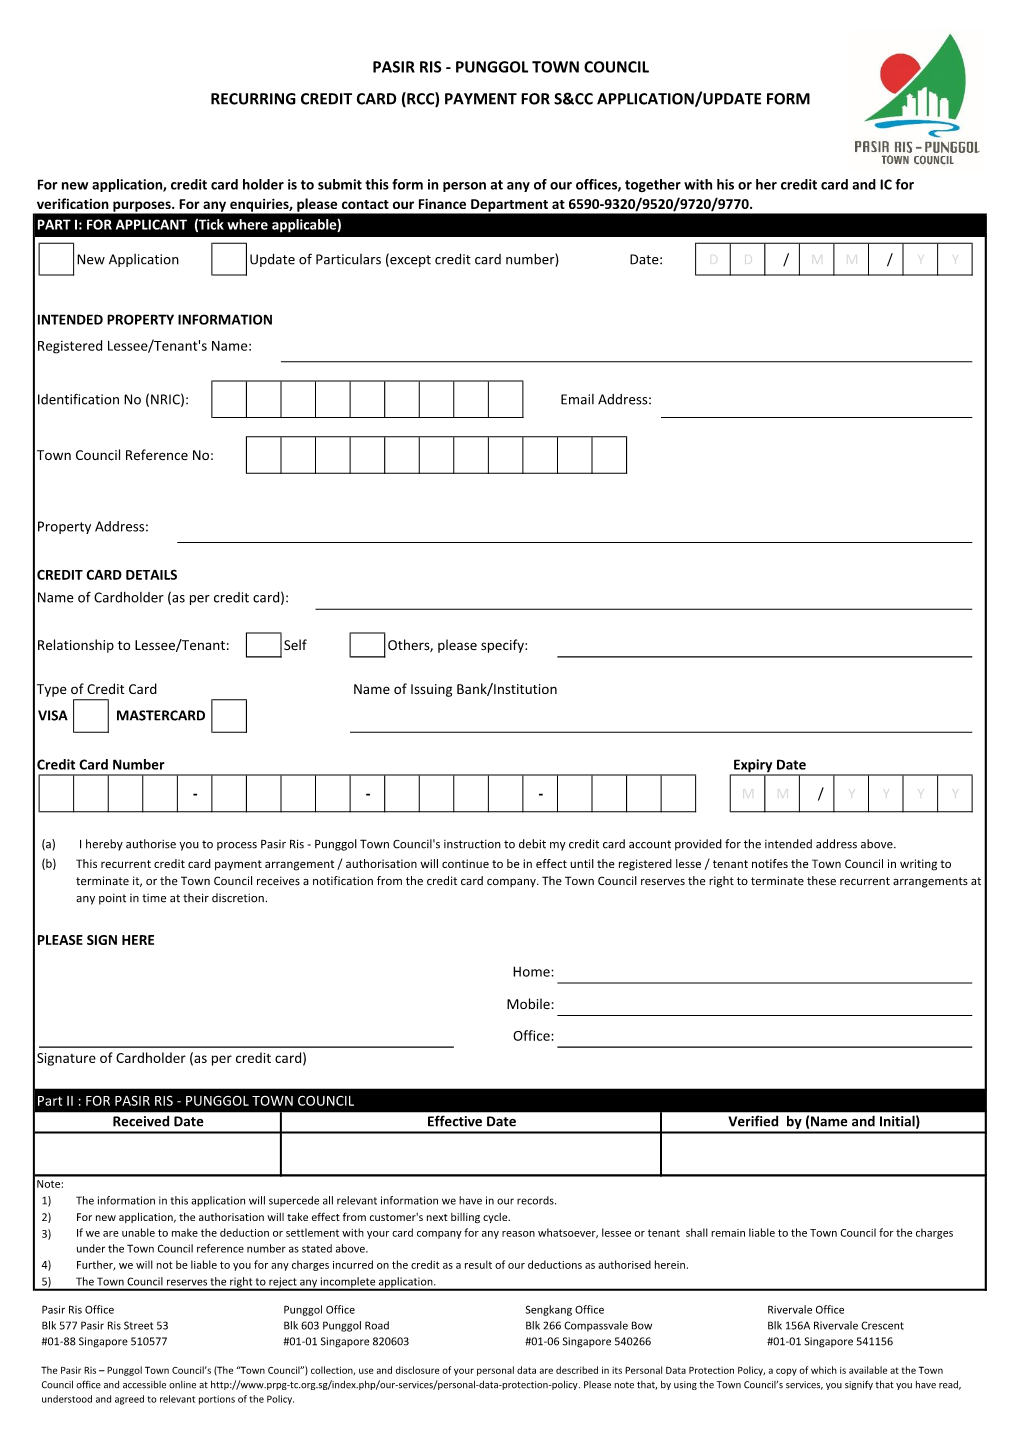 Pasir Ris - Punggol Town Council Recurring Credit Card (Rcc) Payment for S&Cc Application/Update Form